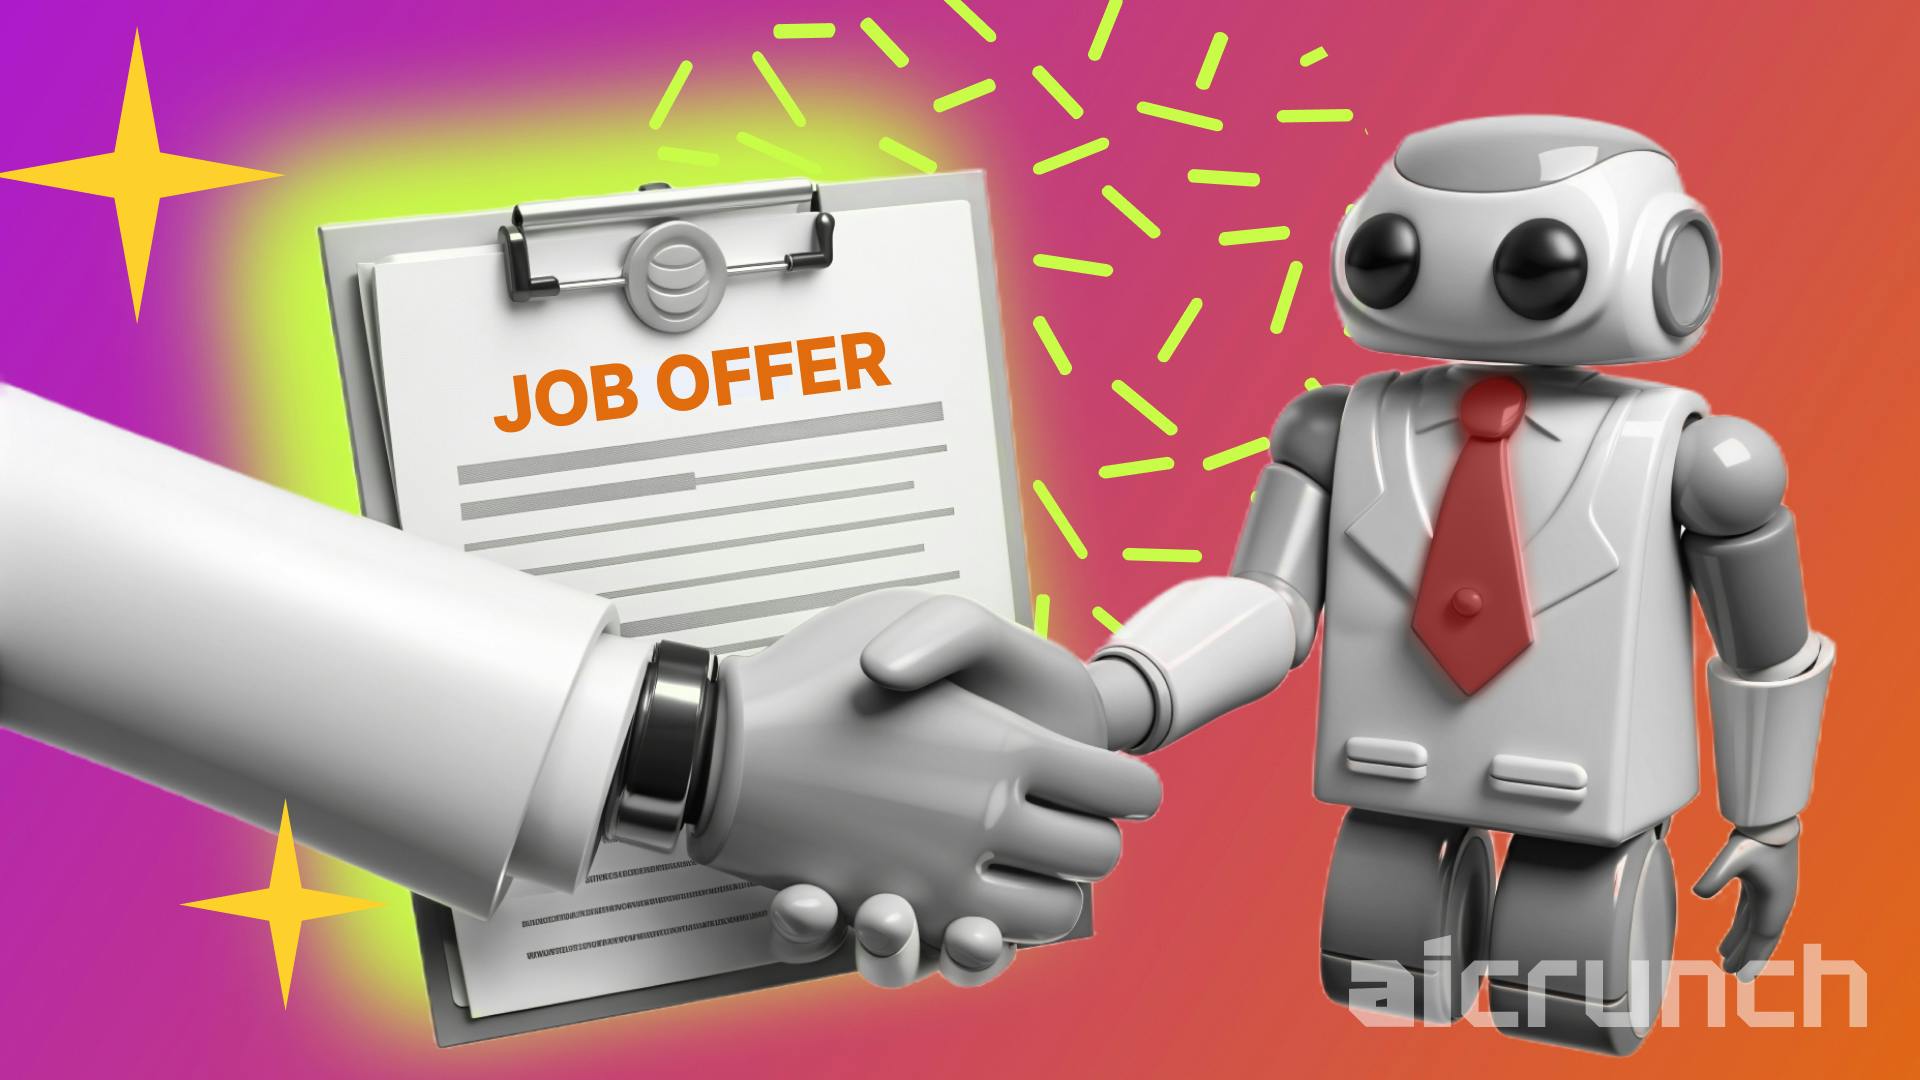 Top AI for Interview Tools to Ace Your Next Job Interview